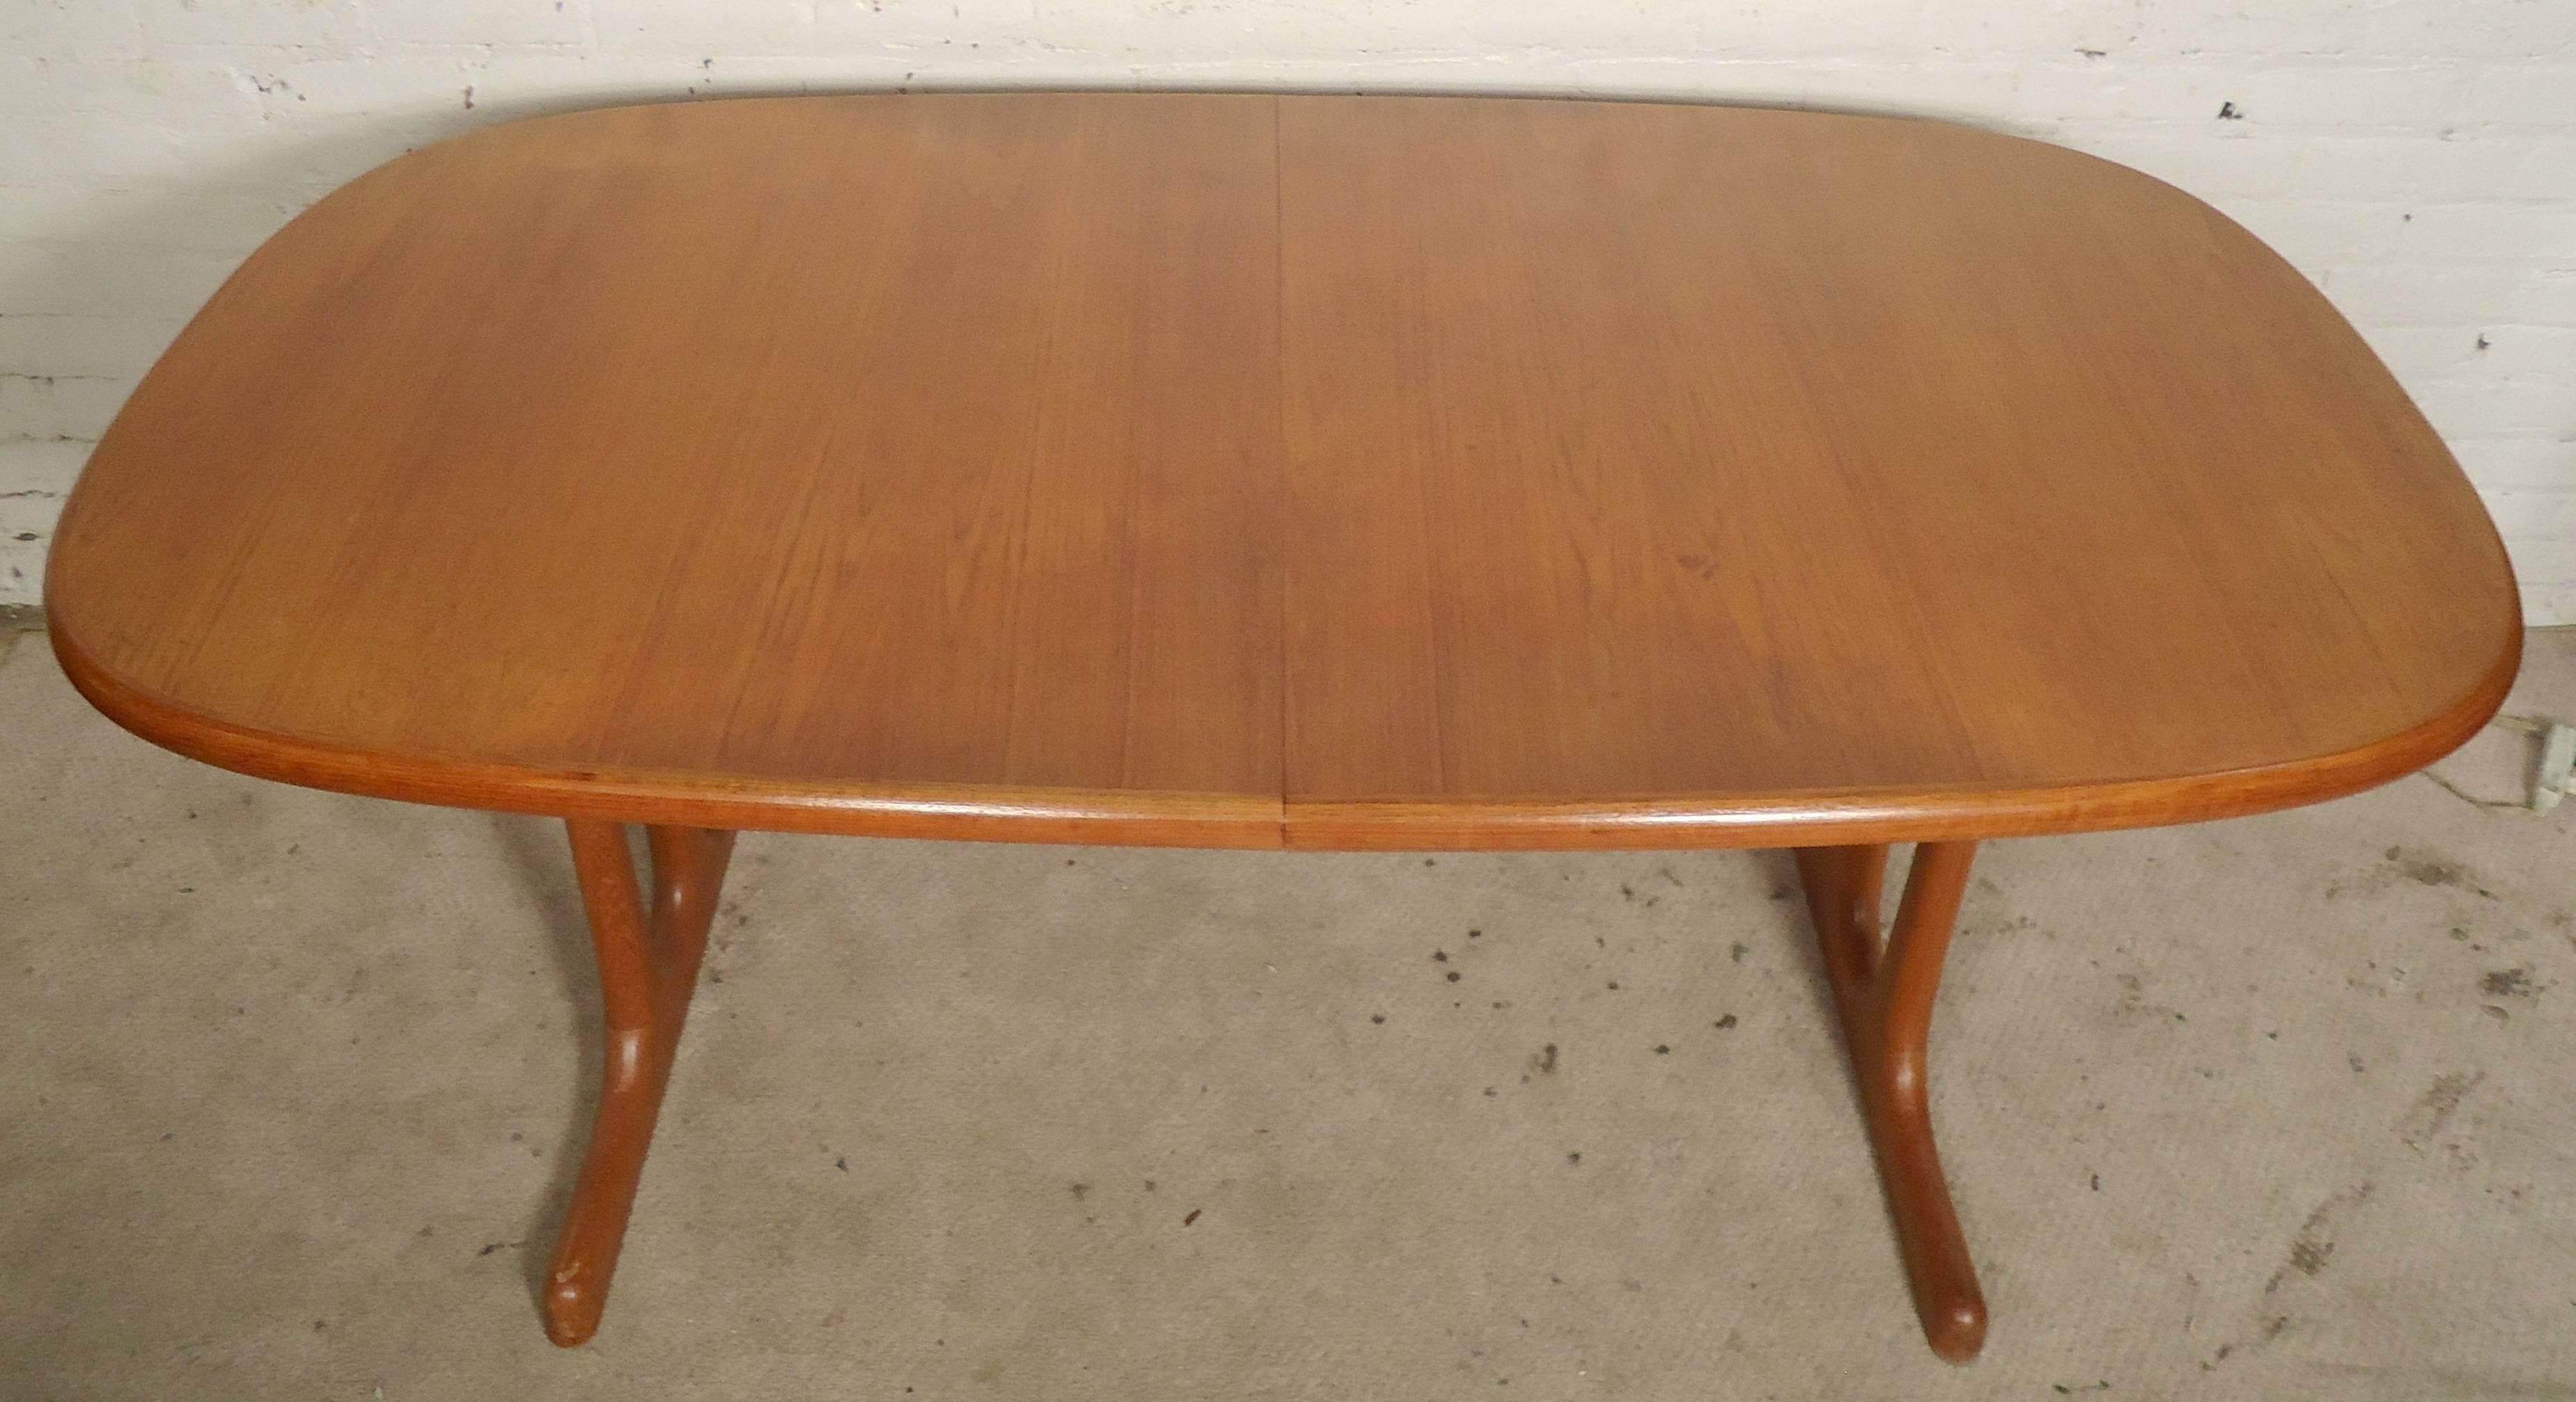 Mid-century modern teak table with two leaves that can open to nine feet long. Warm teak grain, rounded oval shape, trestle base. Great for parties of 4 to 10 people.

(Please confirm item location - NY or NJ - with dealer)
